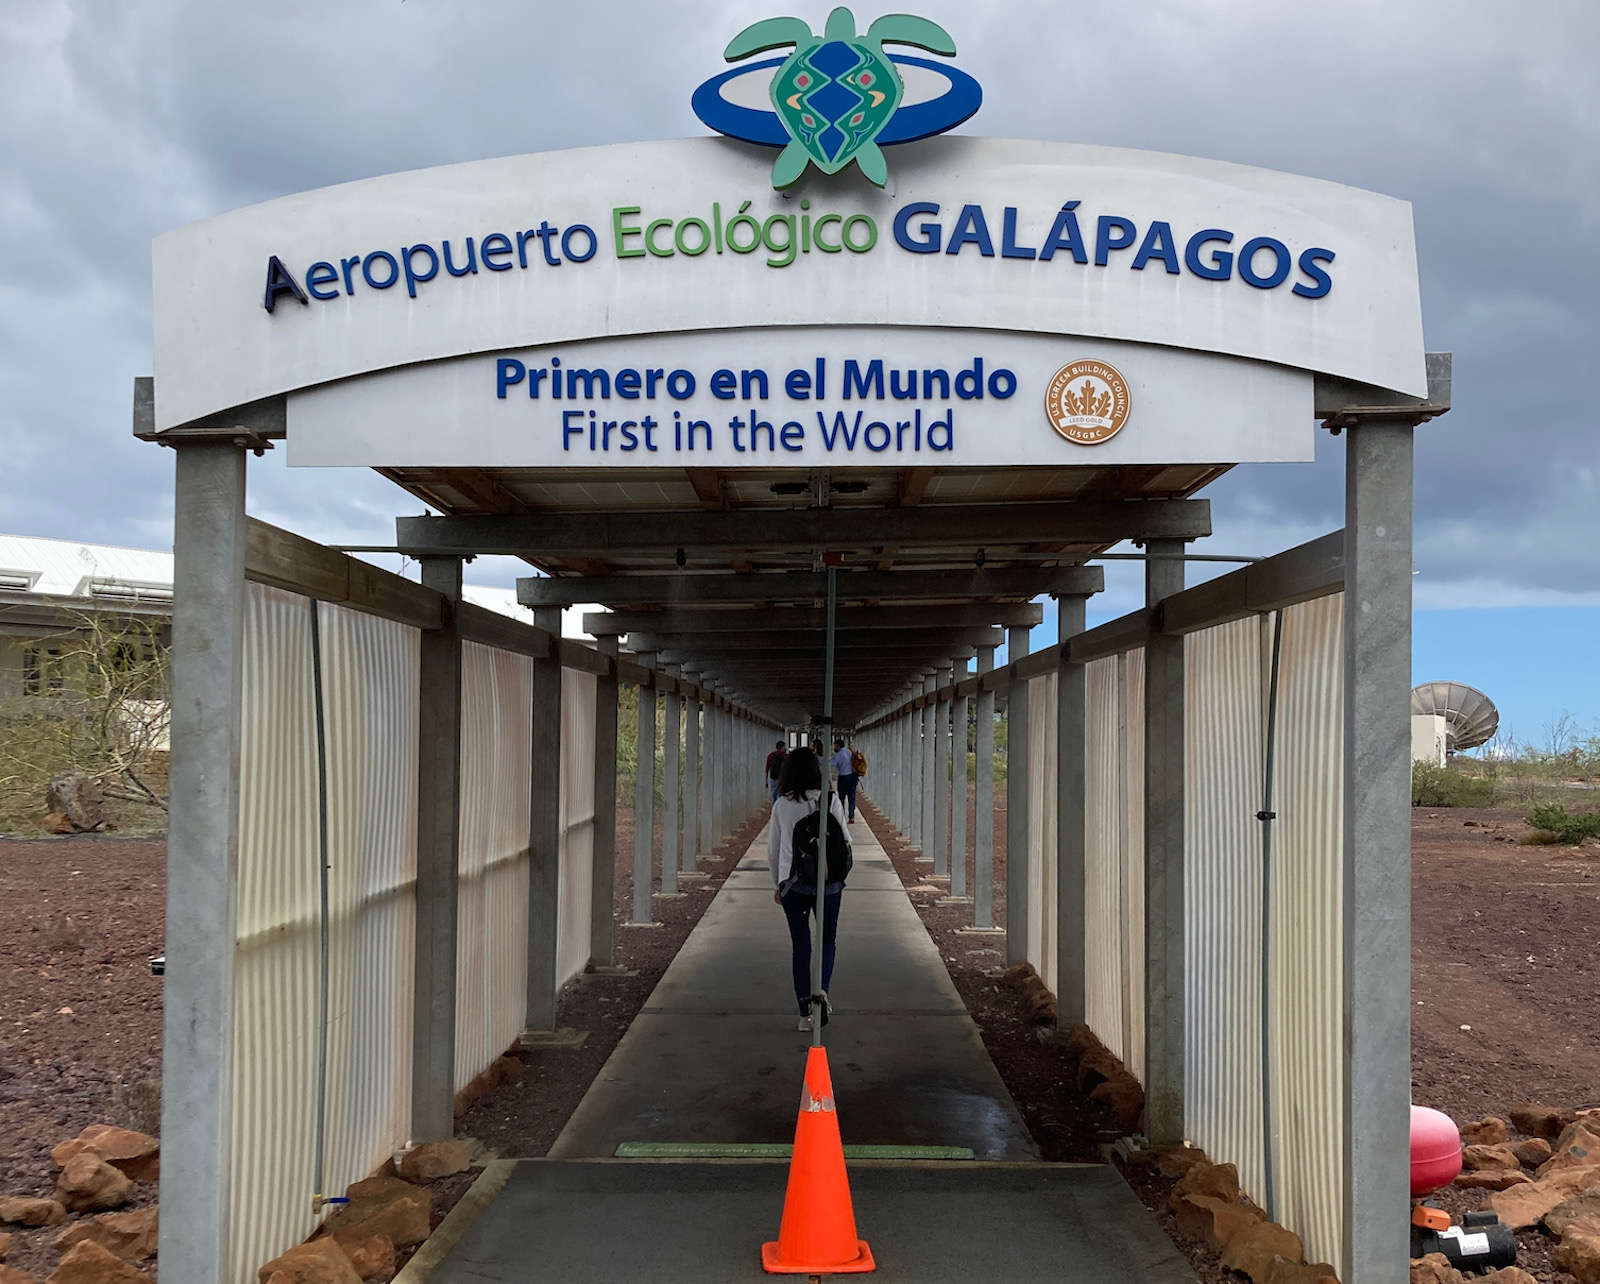 How To Visit The Galapagos Islands Using Points & Miles